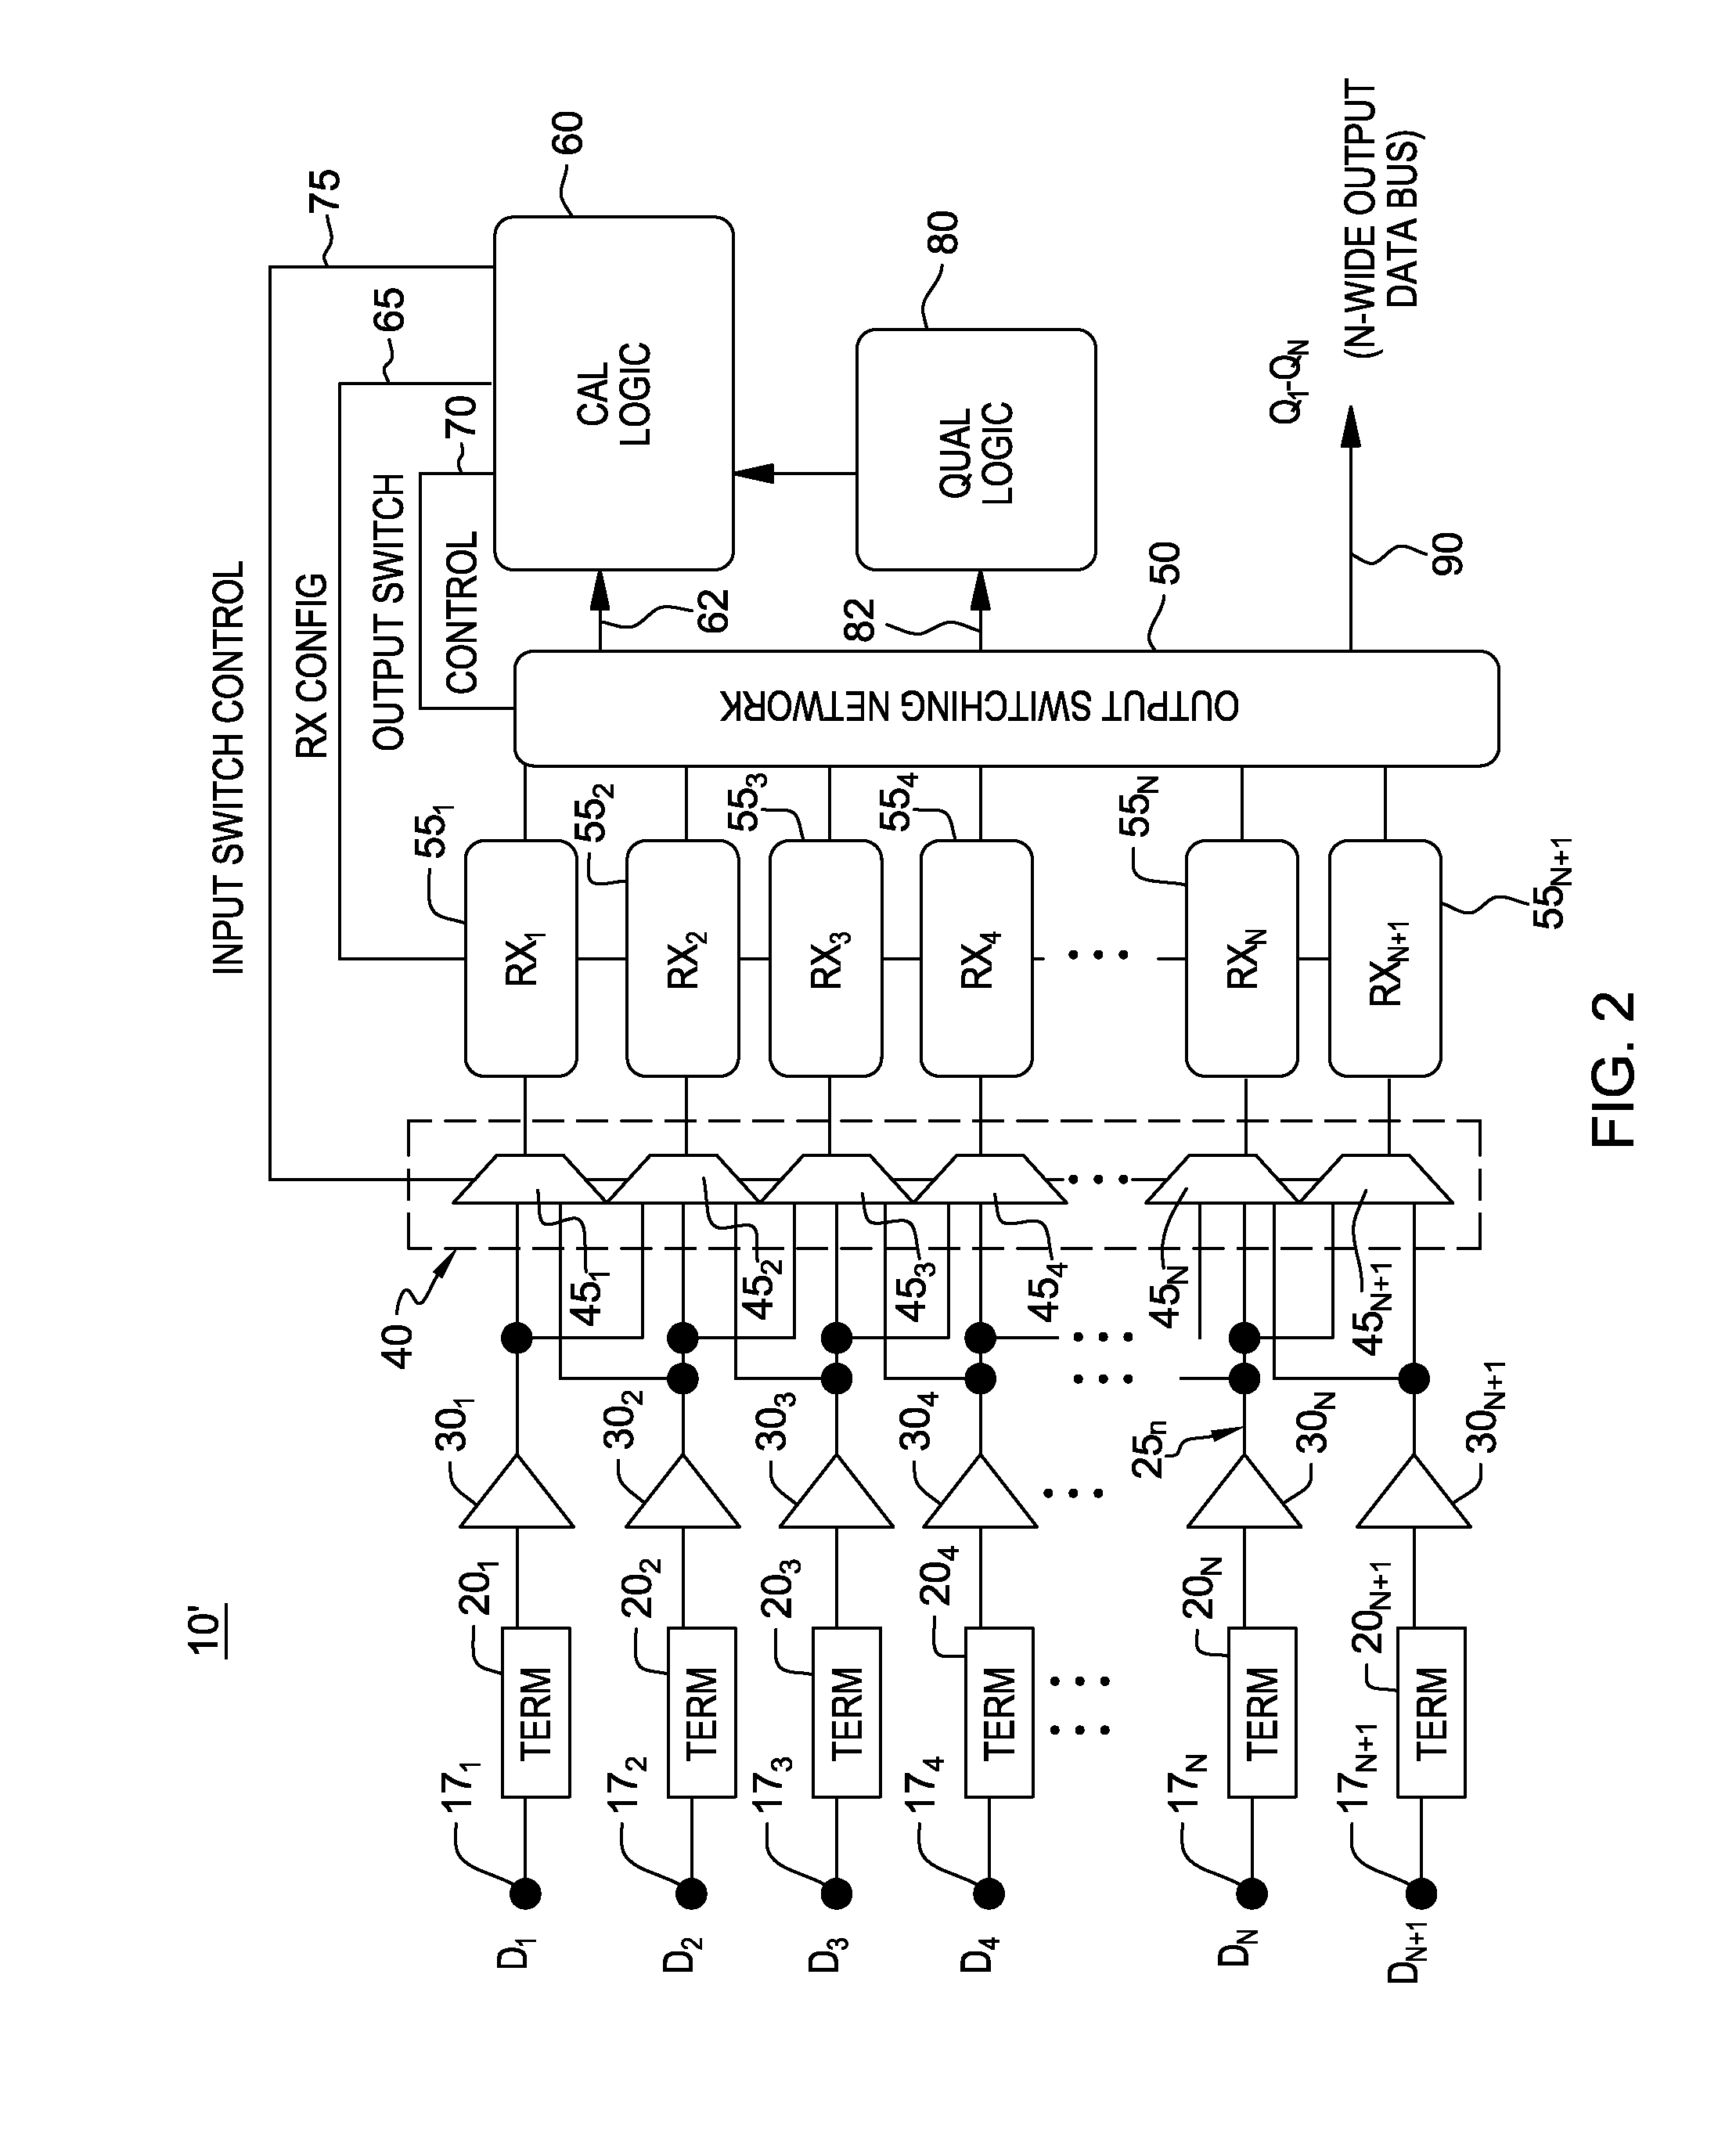 Fault tolerant parallel receiver interface with receiver redundancy